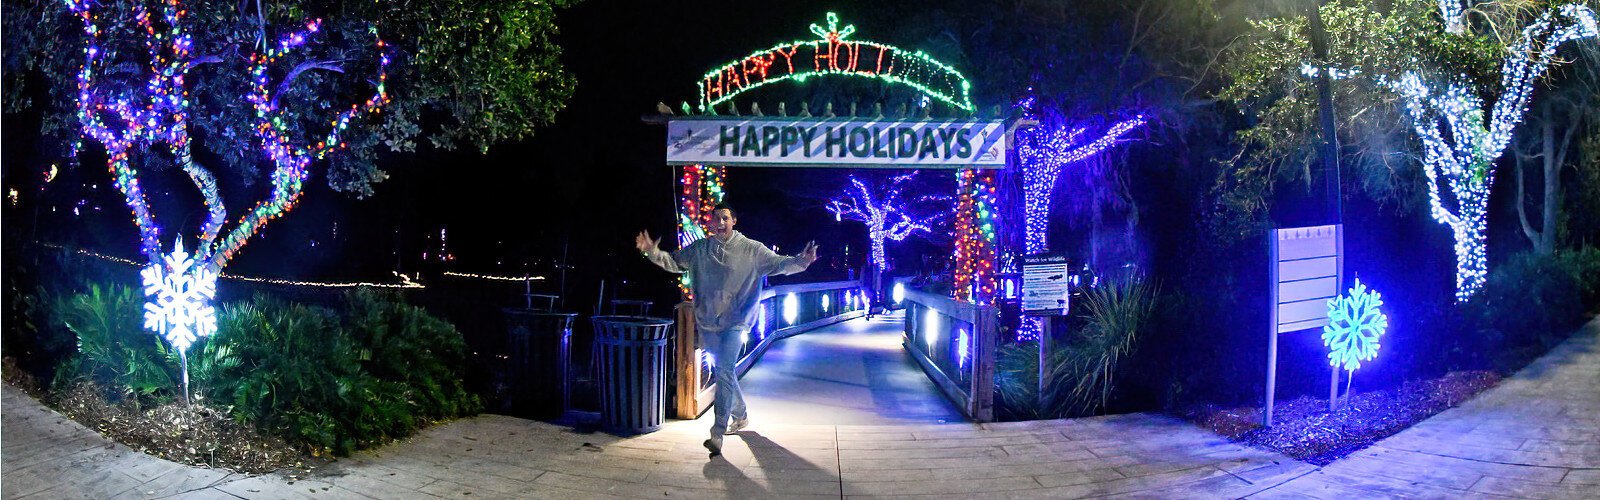  Bedecked in over a million LED lights, the Florida Botanical Gardens in Largo provide a seasonal escape into the dazzling display of its 23rd annual Holiday Lights.